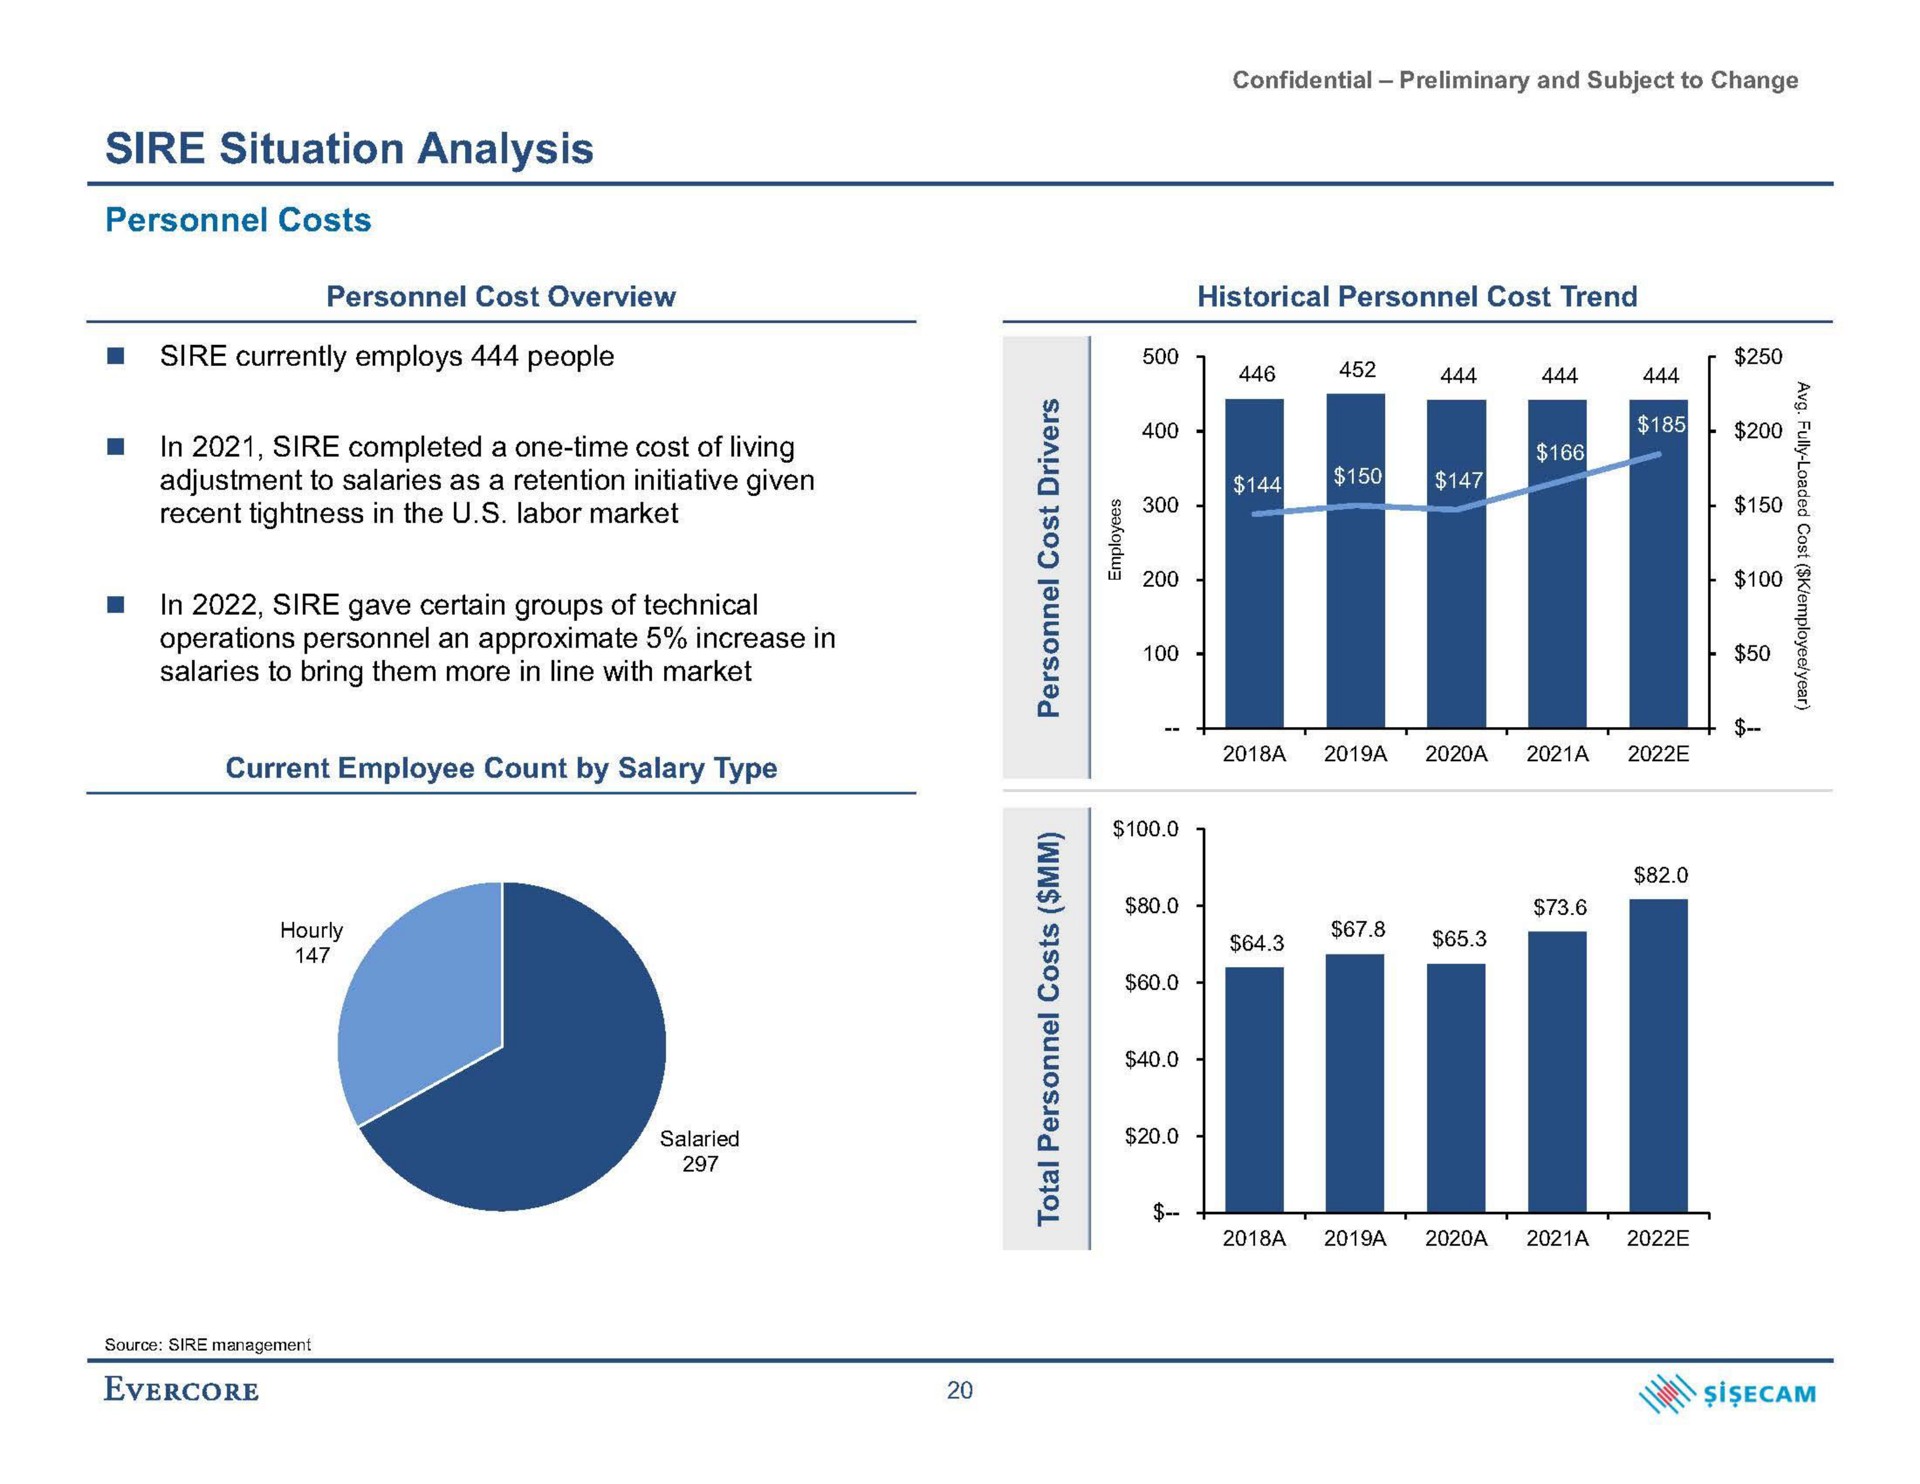 sire situation analysis recent tightness in the labor market | Evercore